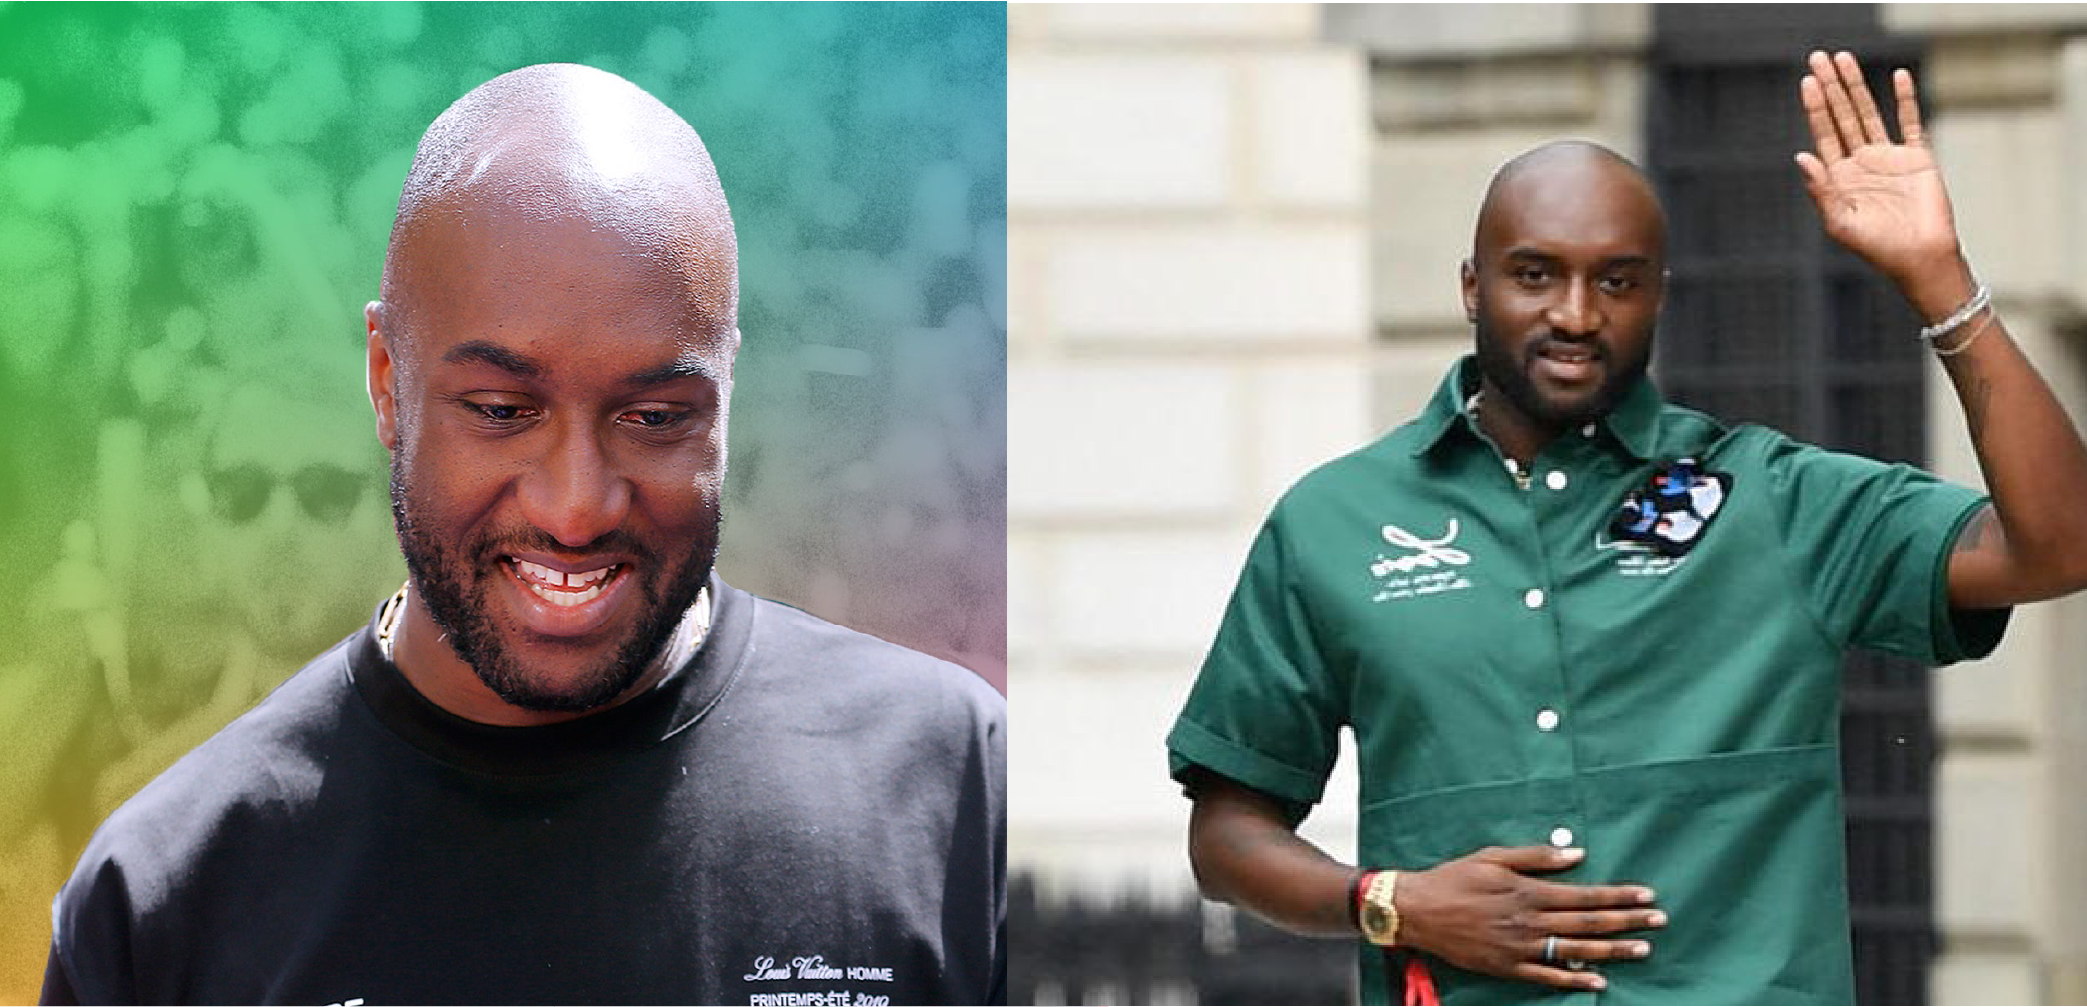 Off-White founder Virgil Abloh dies at 41 after a private battle